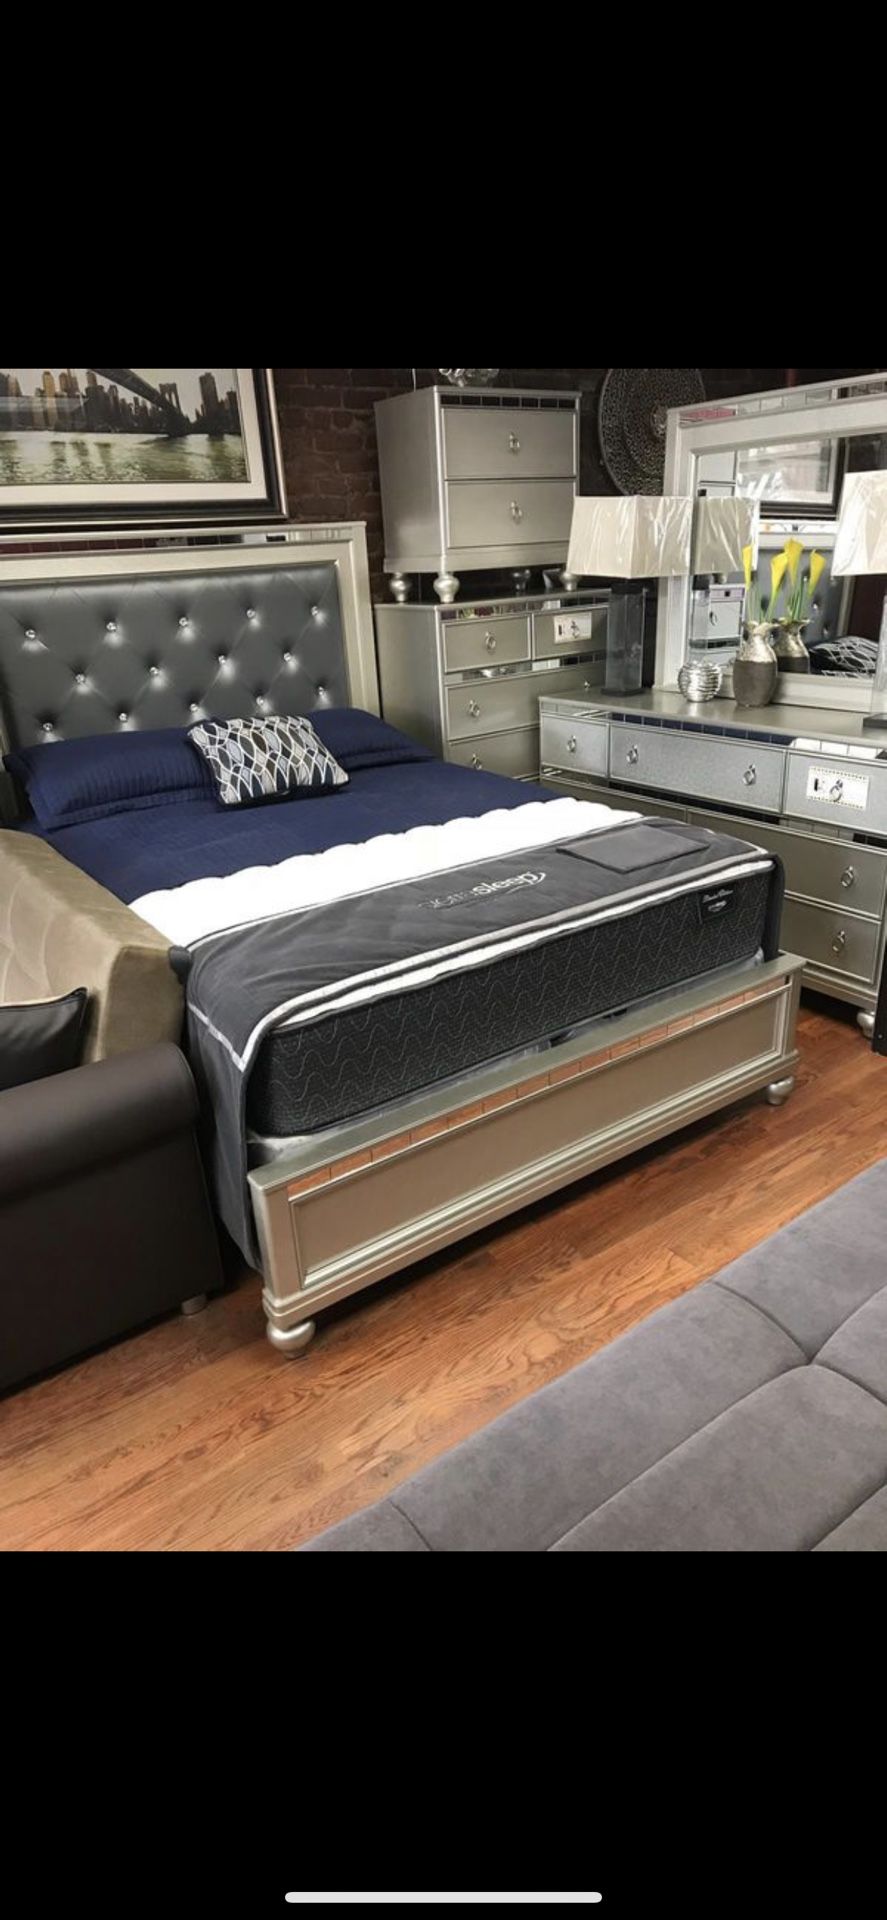 Brand New Complete Bedroom Set With Orthopedic Mattress For $1499